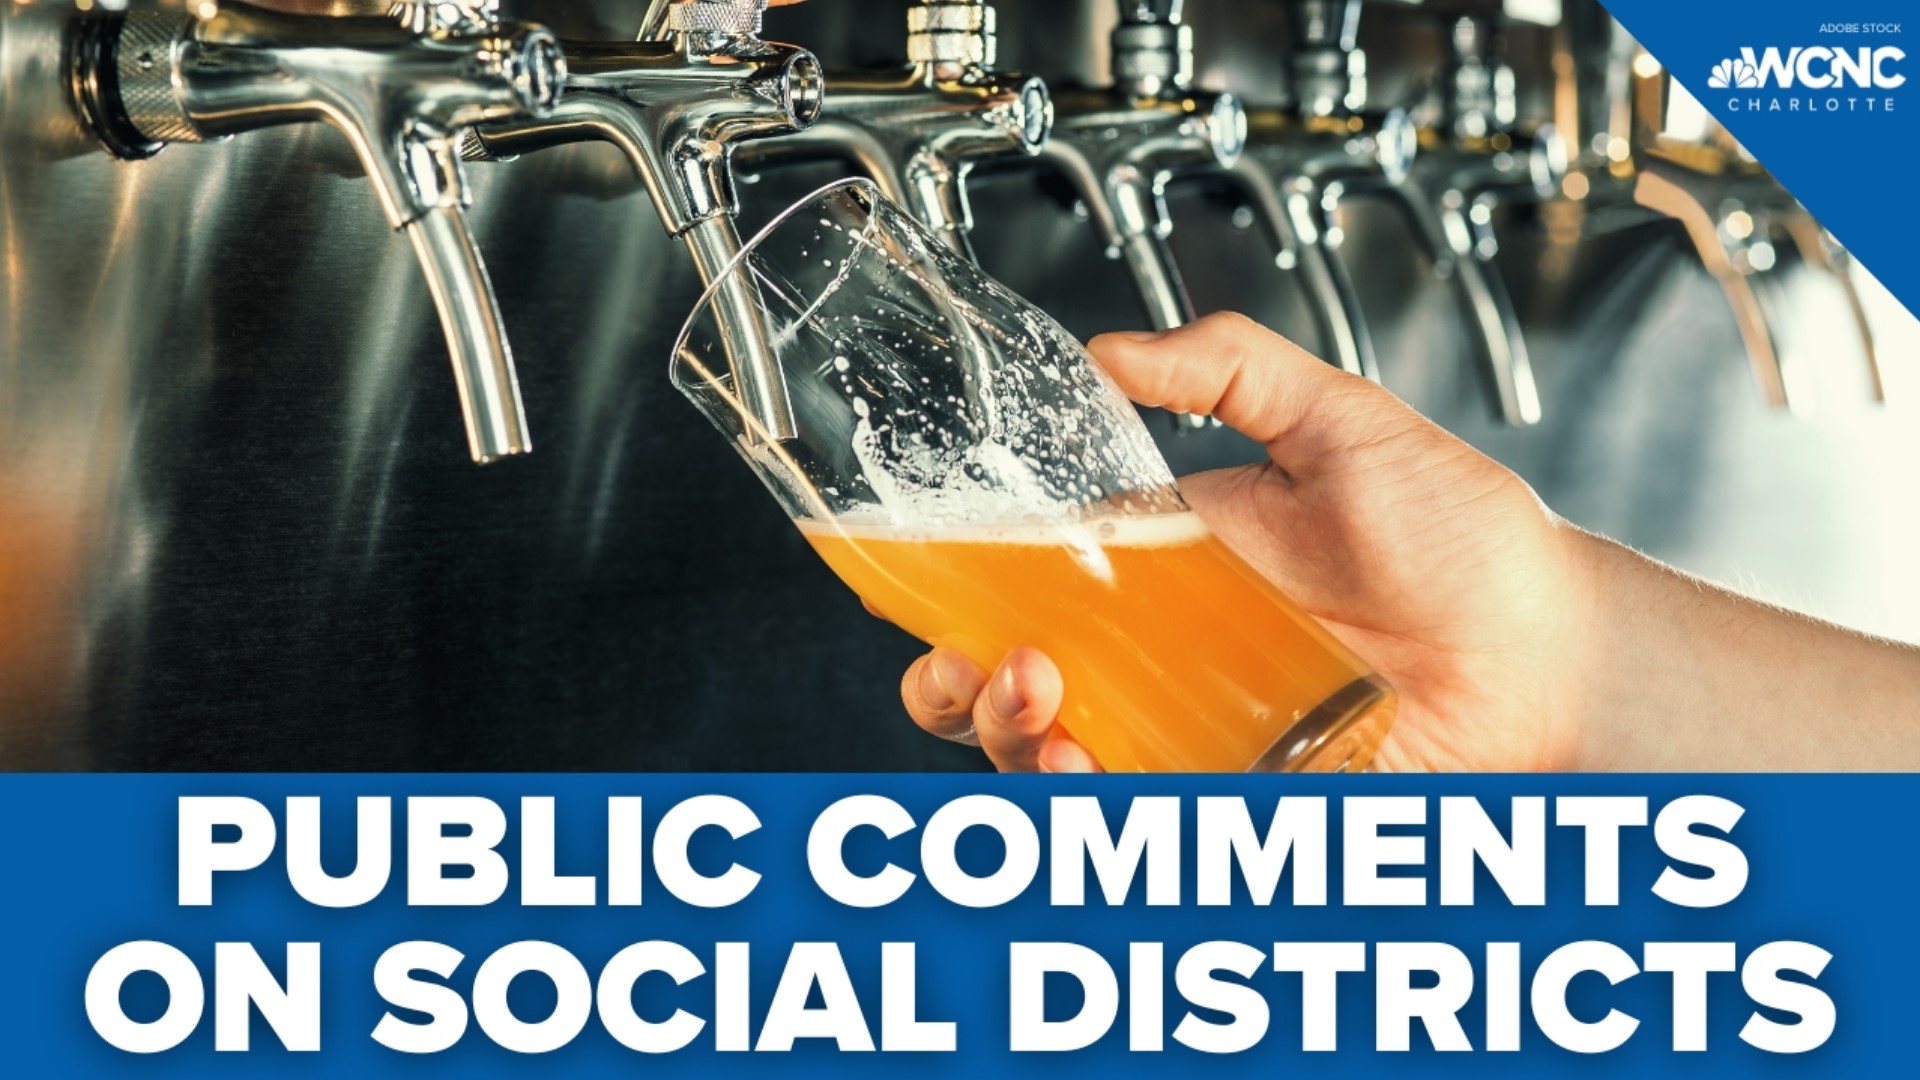 Charlotte is getting closer to creating social districts, where people can drink in the streets within designated boundaries.